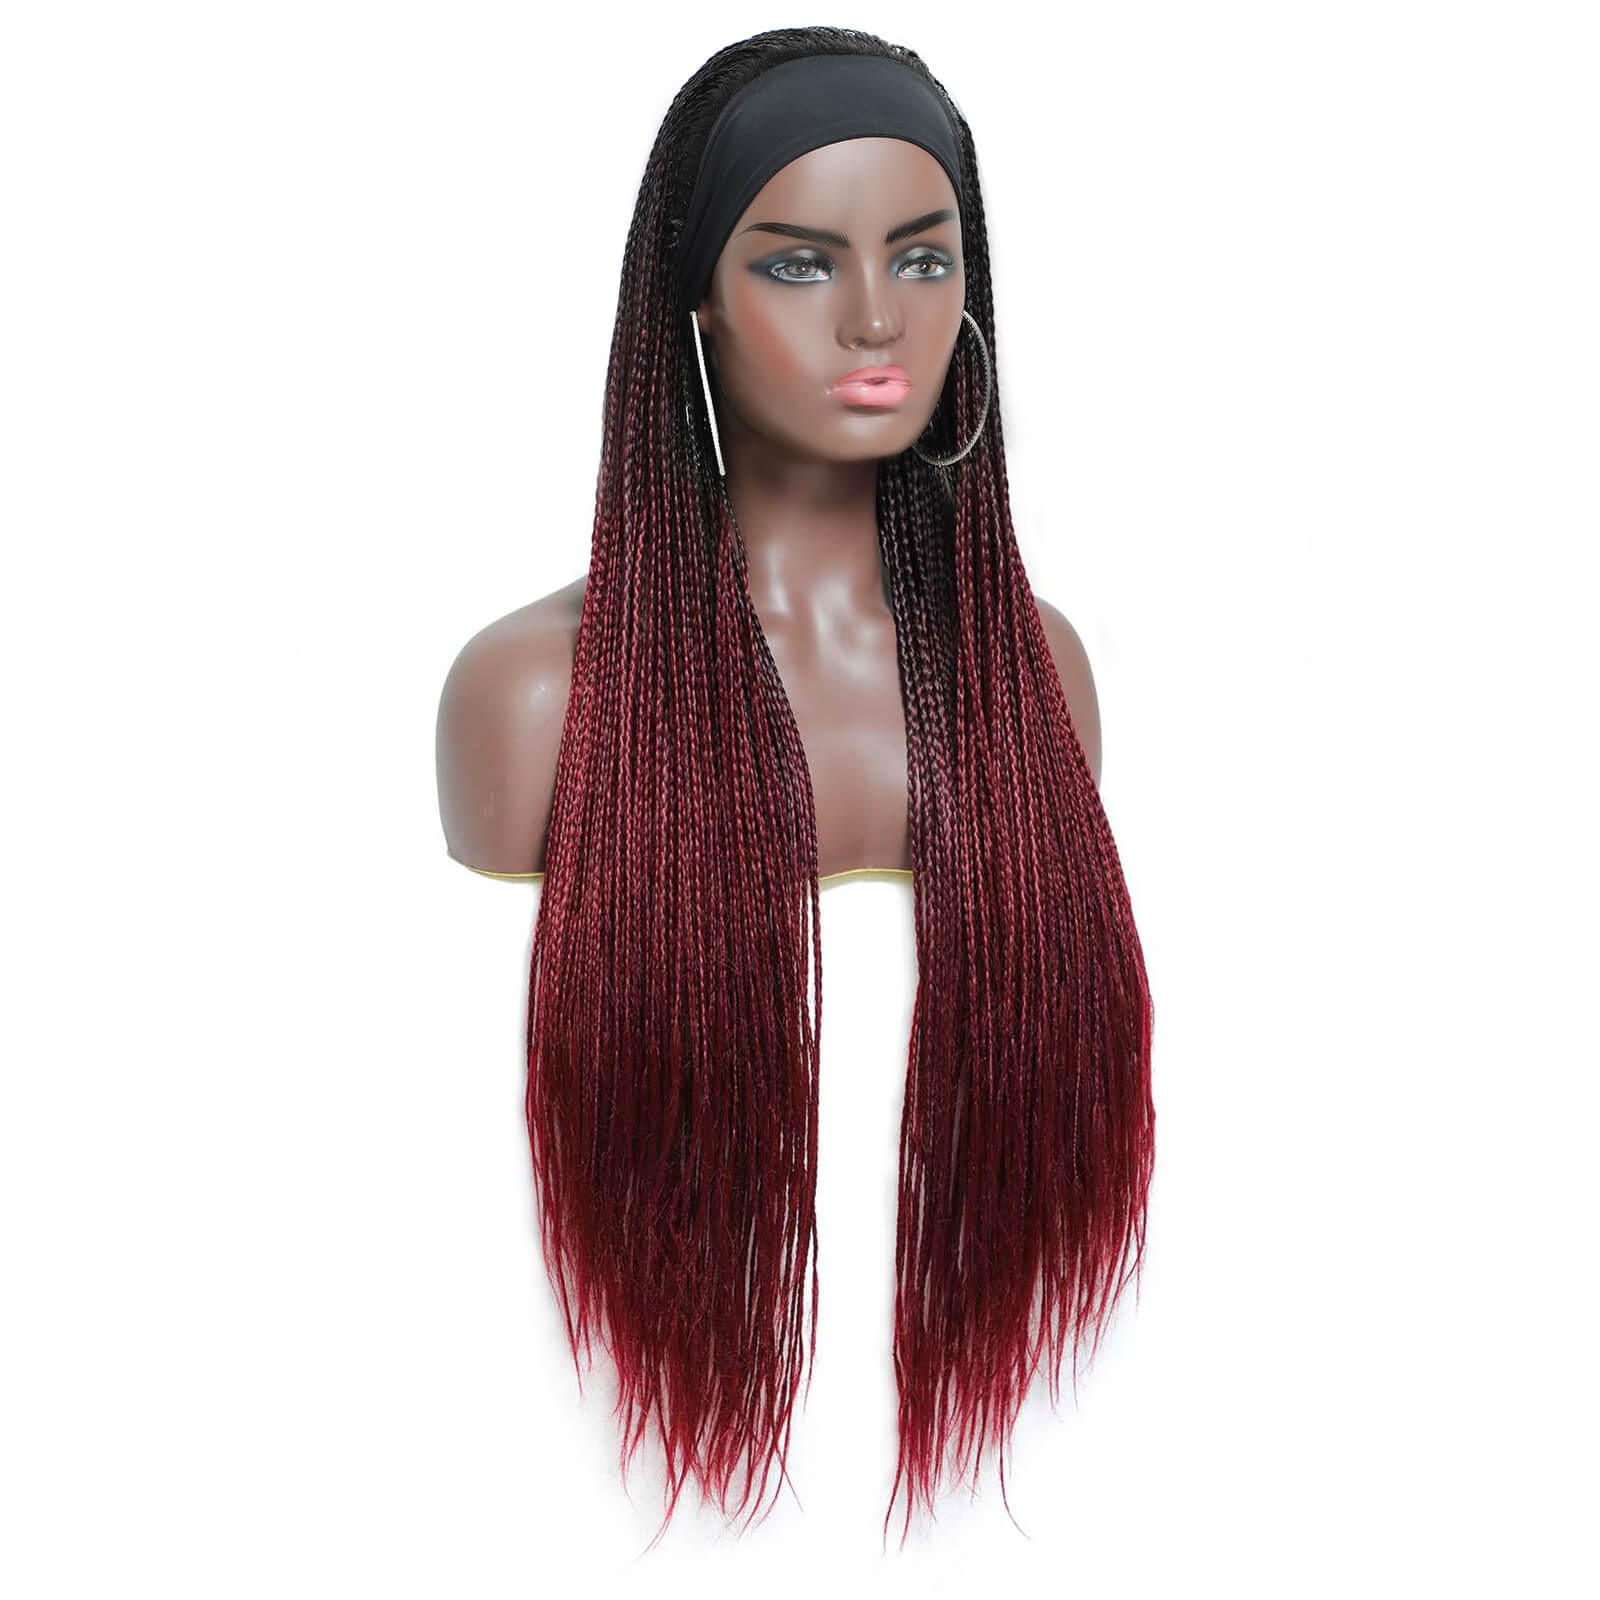 Long Braided Ombre Black Burgundy Highlight Synthetic Wig Box